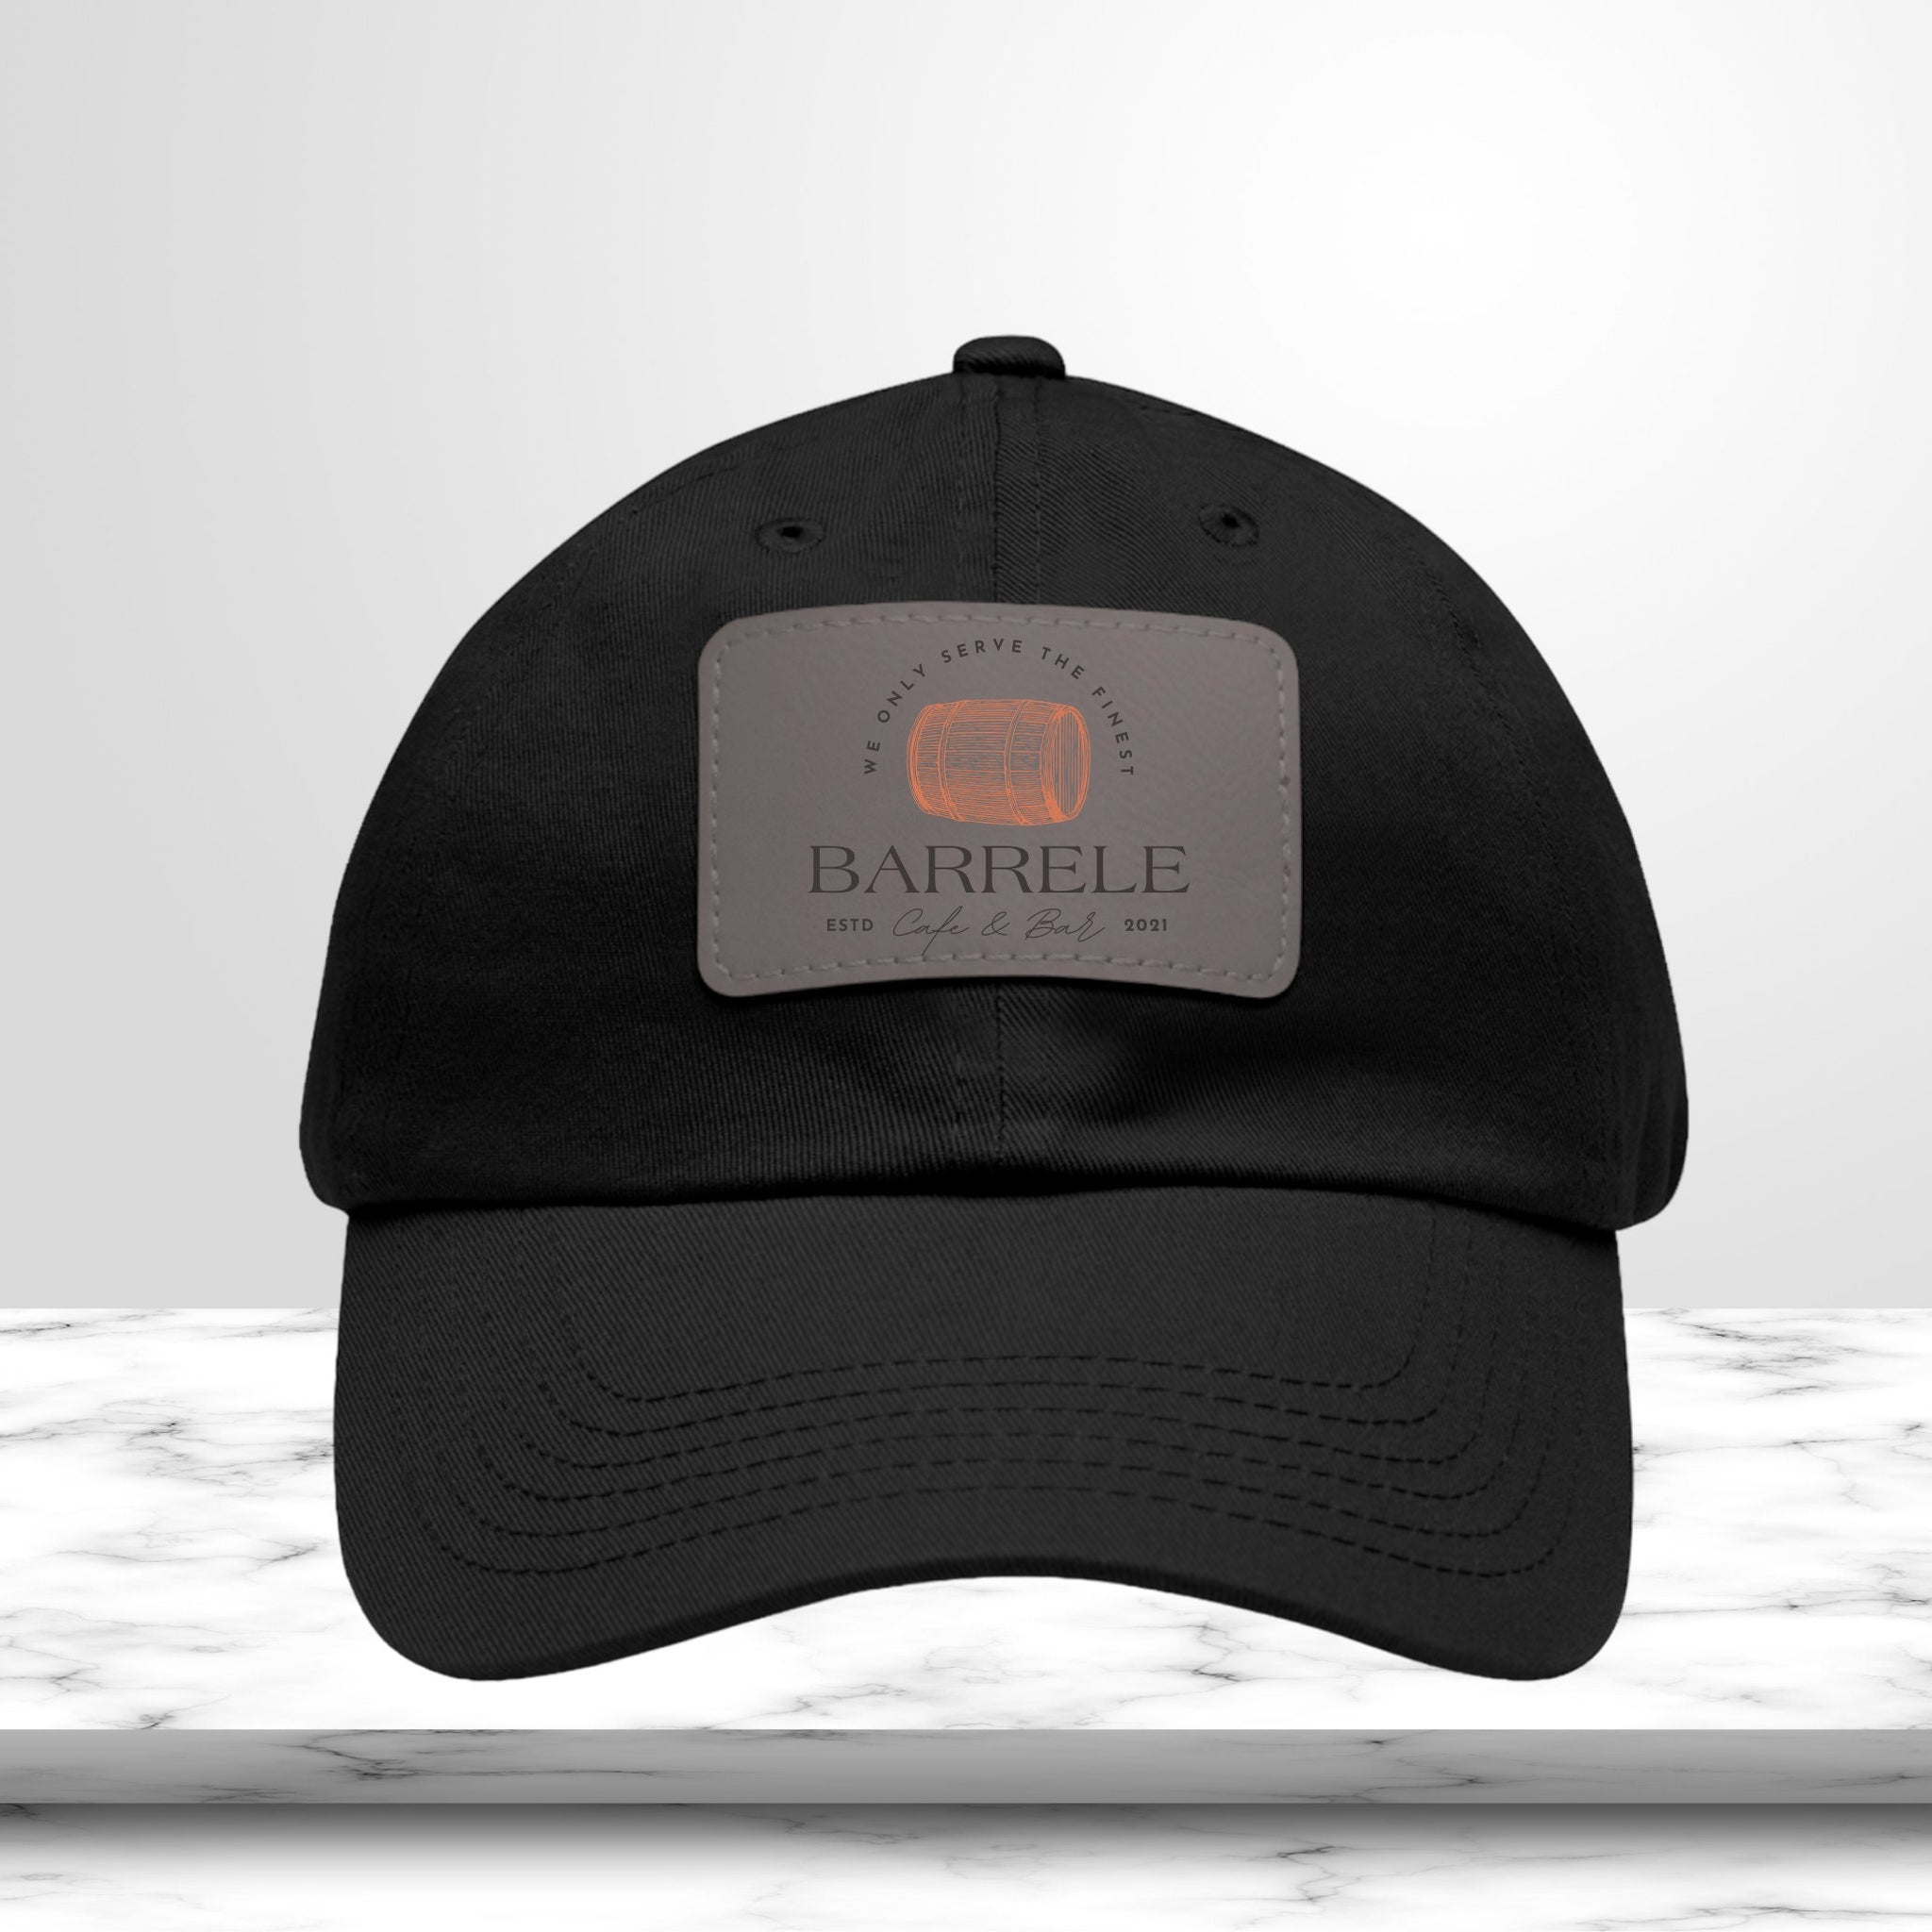 Custom Branded Cricket Hat, Corporate Gifts